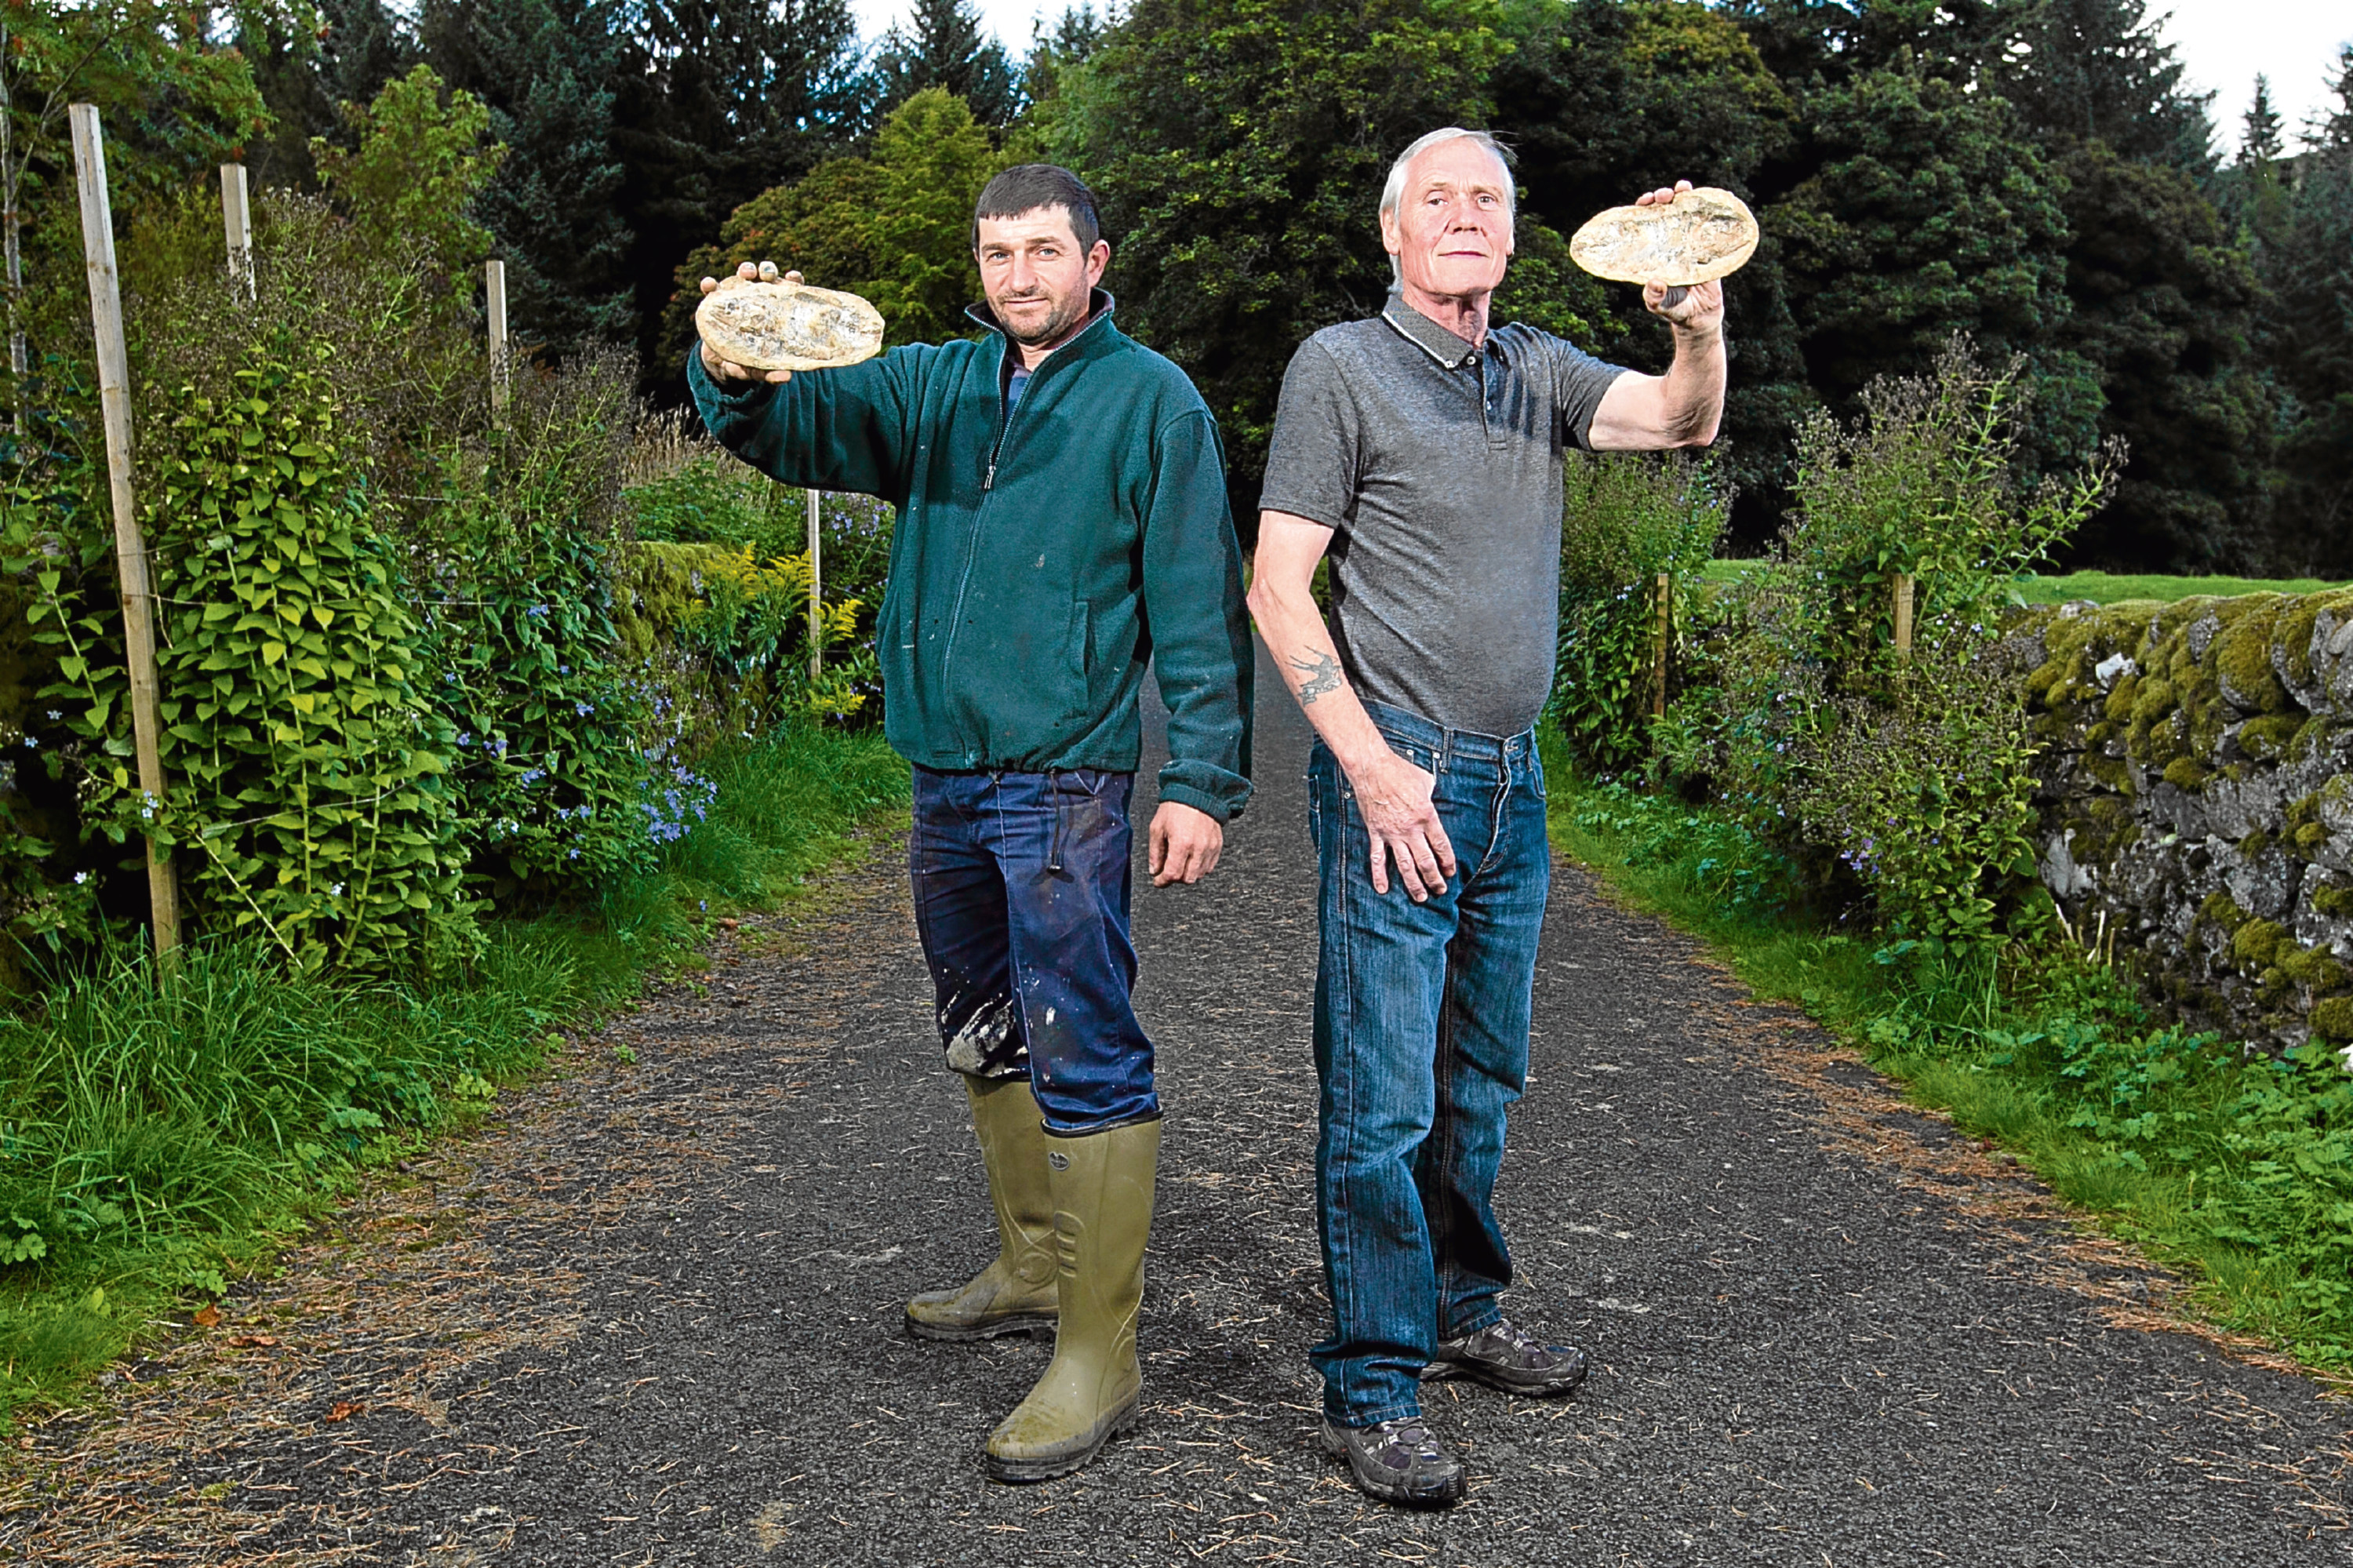 Ionel Obreja and Mick Hardy, who found a fossil of a fish in a garden they were working in (Andrew Cawley / DC Thomson)